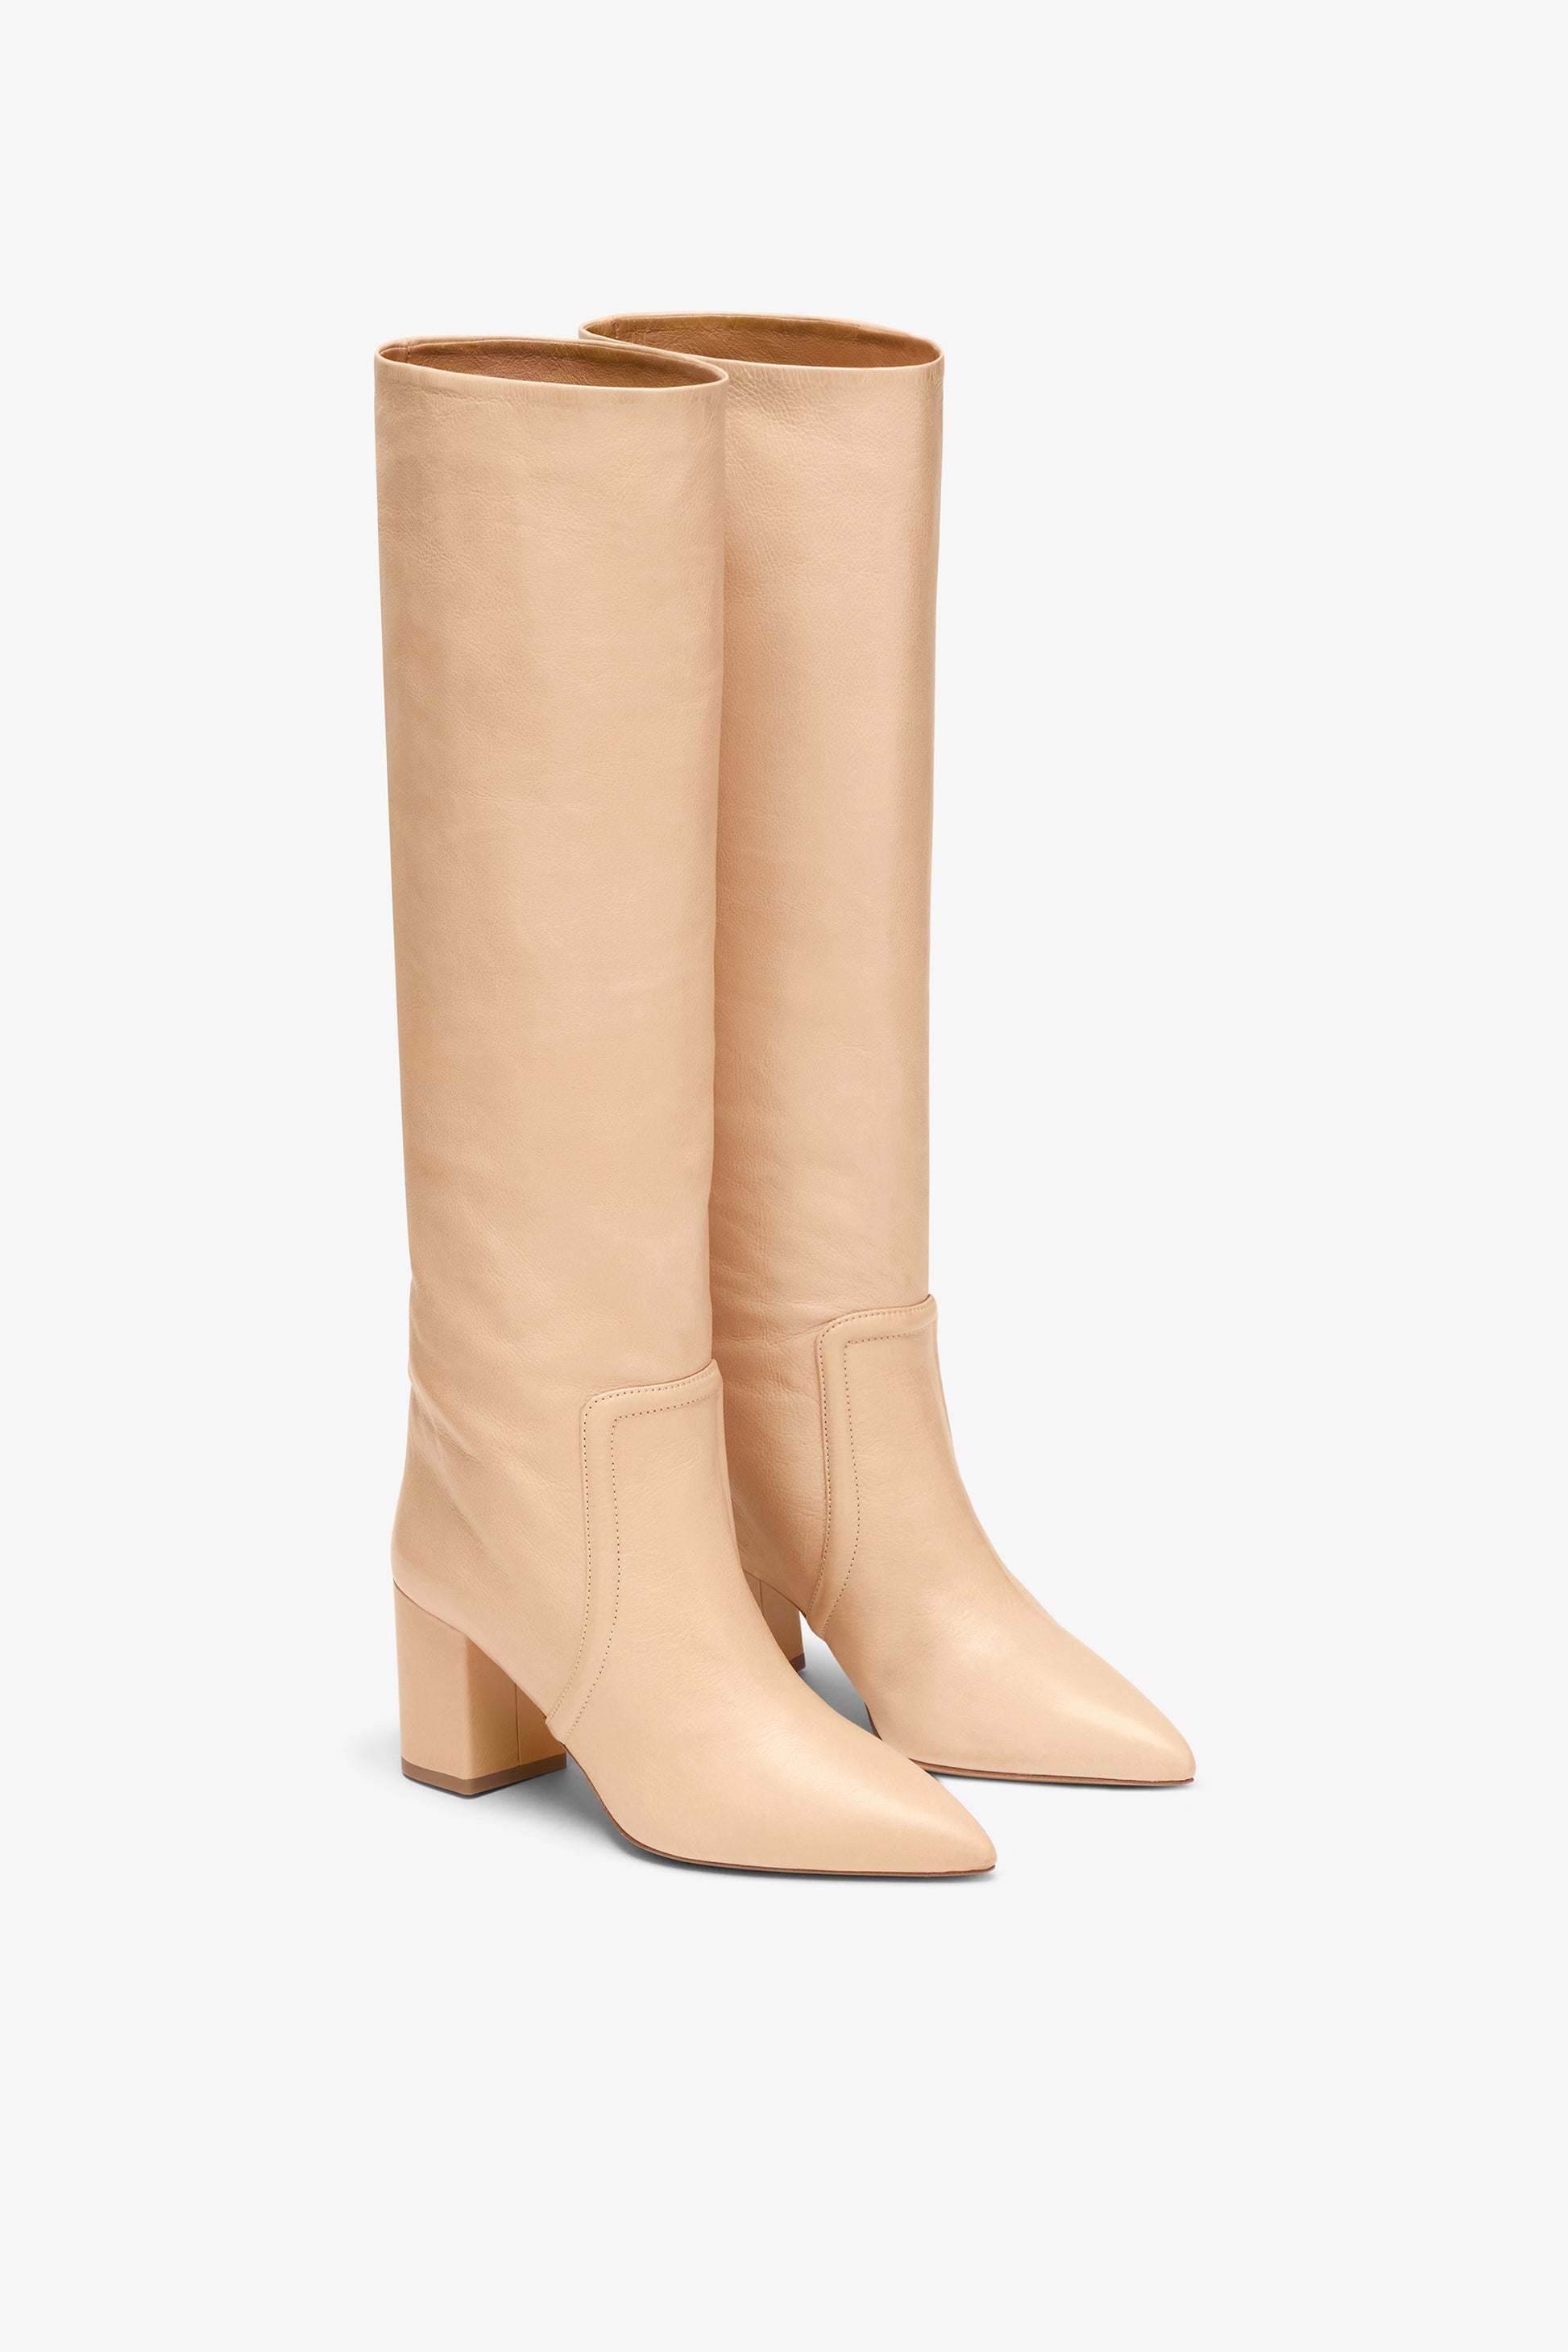 Powder leather knee-high boot